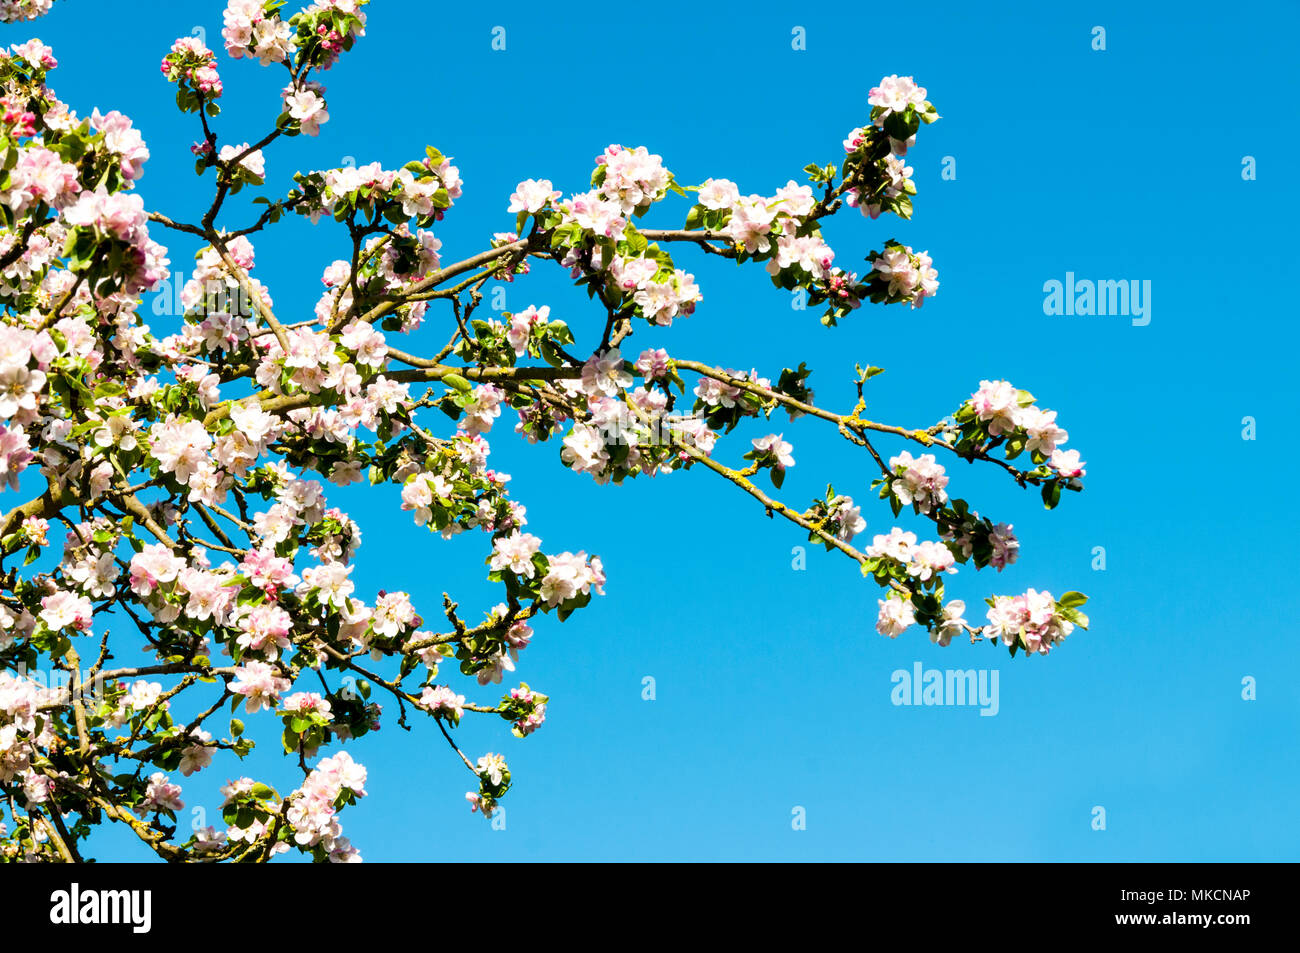 White apple blossom on branches of a Bramley apple tree, Malus domestica, against a clear blue sky Stock Photo